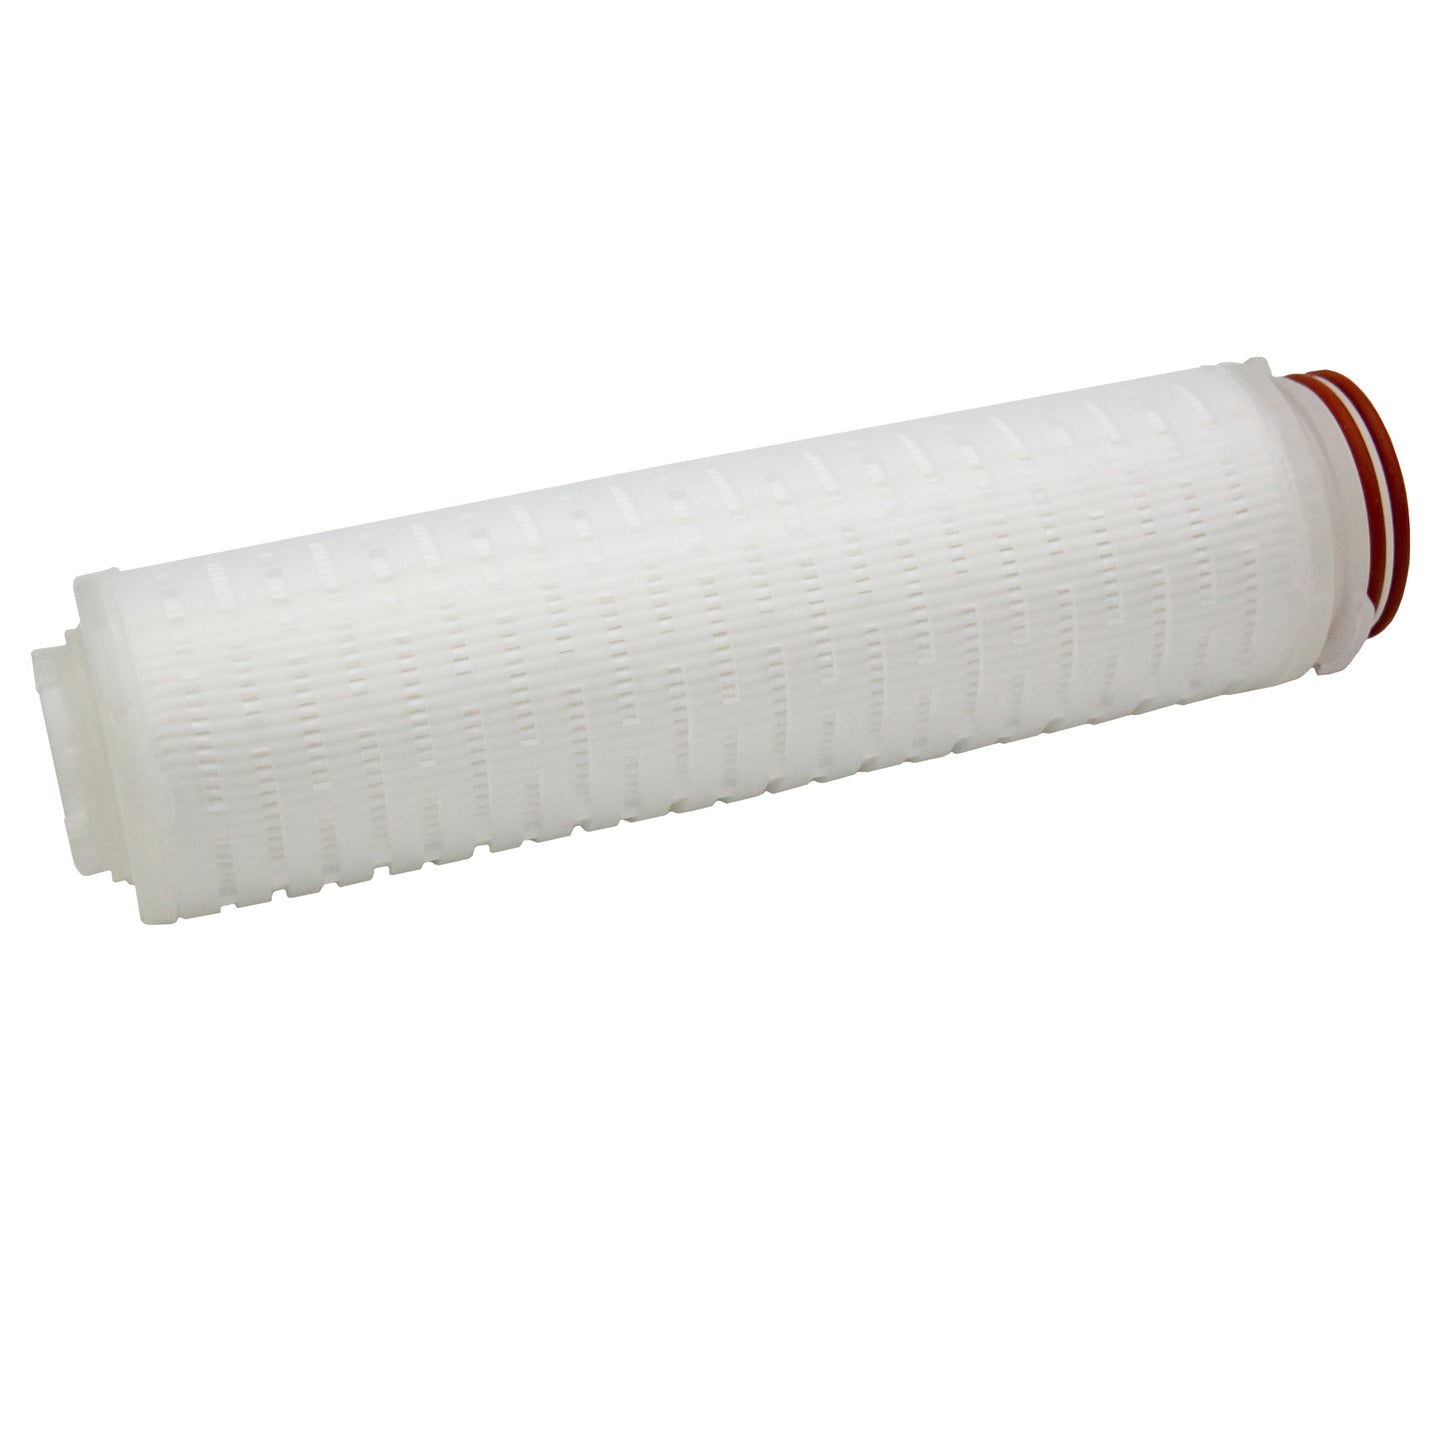 whole filter cartridge